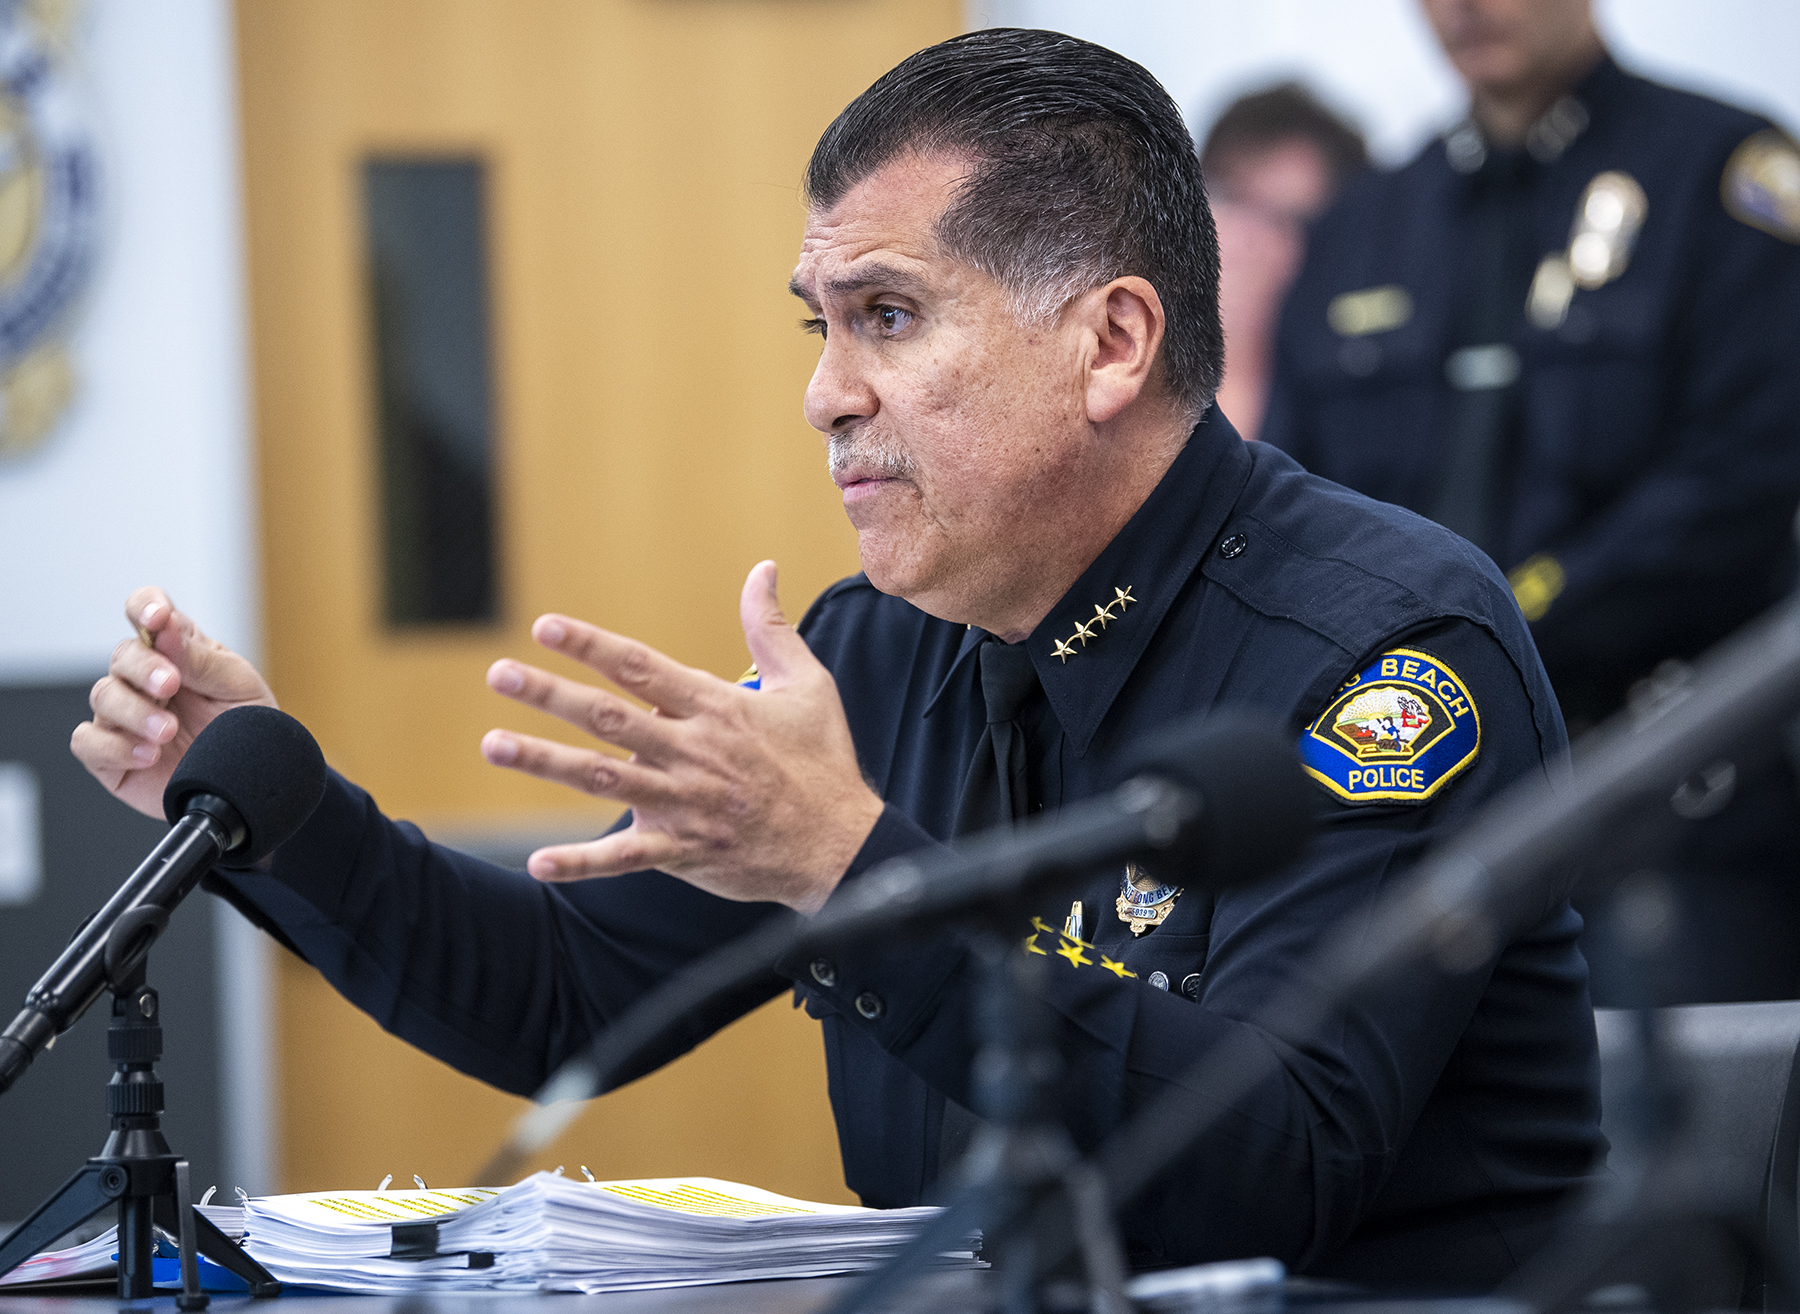 LBPD already uses facial recognition technology, but a fight's brewing over whether it should • Long Beach Post News - Long Beach Post